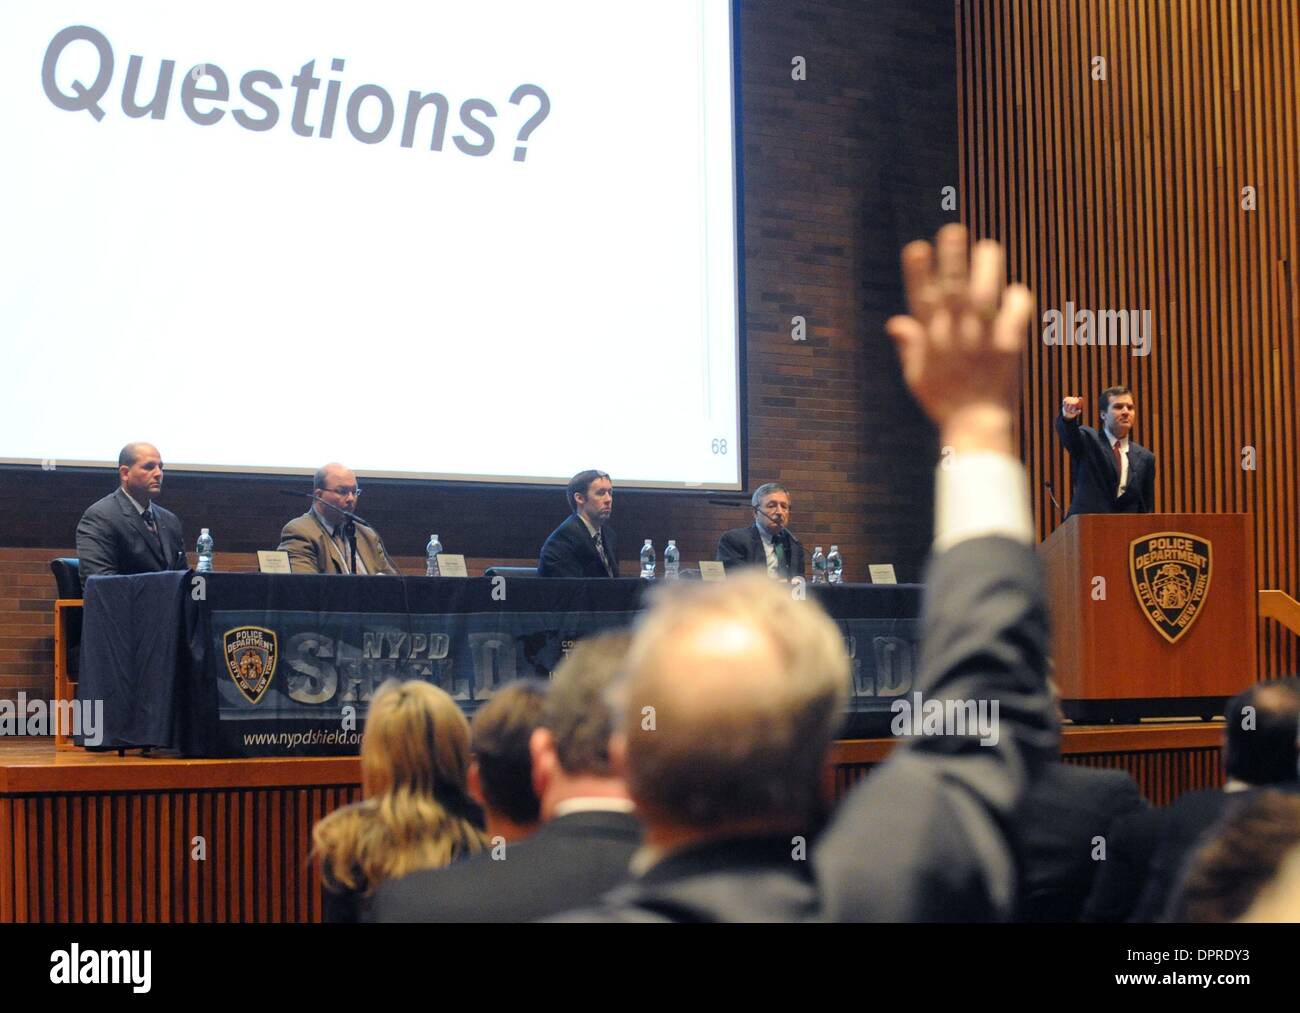 Dec 05, 2008 - Manhattan, New York, USA - DR. RICHARD FALKENRATH, Deputy Commissioner Counterterrorism Bureau takes questions as Police Commissioner Raymond W. Kelly hosts NYPD SHIELD Conference at One Police Plaza to discuss the attacks in Mumbai last month. NYPD SHIELD is a public-private sector security partnership countering terrorism through information sharing.  (Credit Image Stock Photo